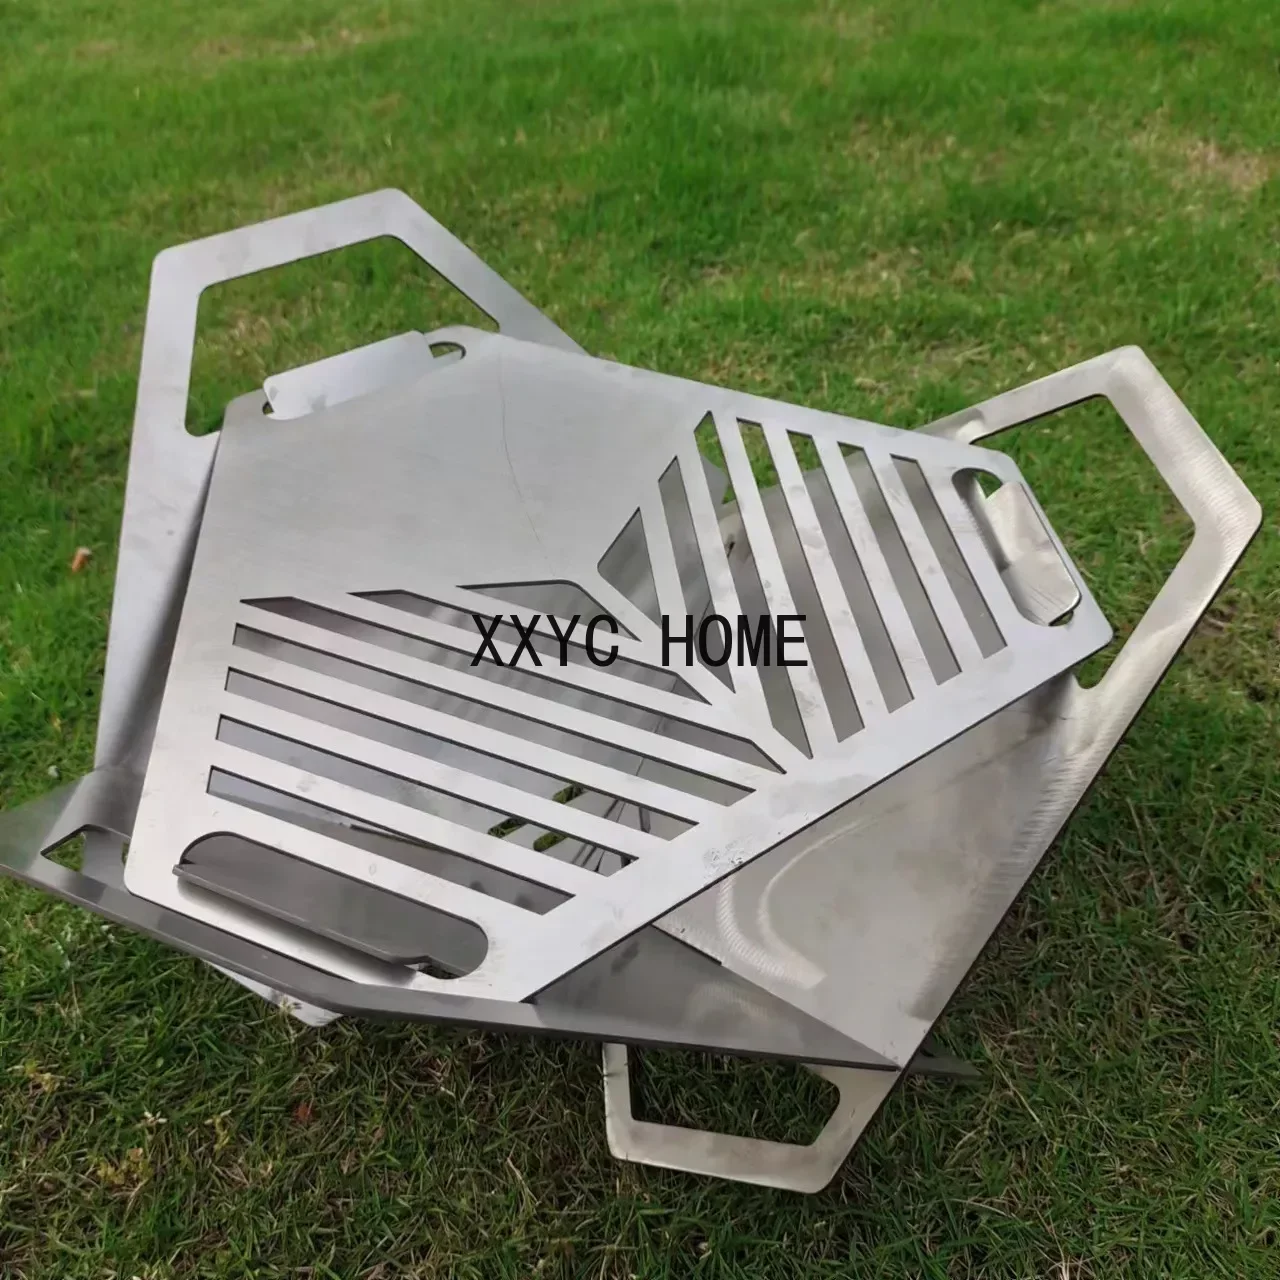 

Stainless Steel Barbecue Stove Bonfire Portable Outdoor Grill Firewood Picnic Camping Folding Courtyard Fire Rack Self-driving